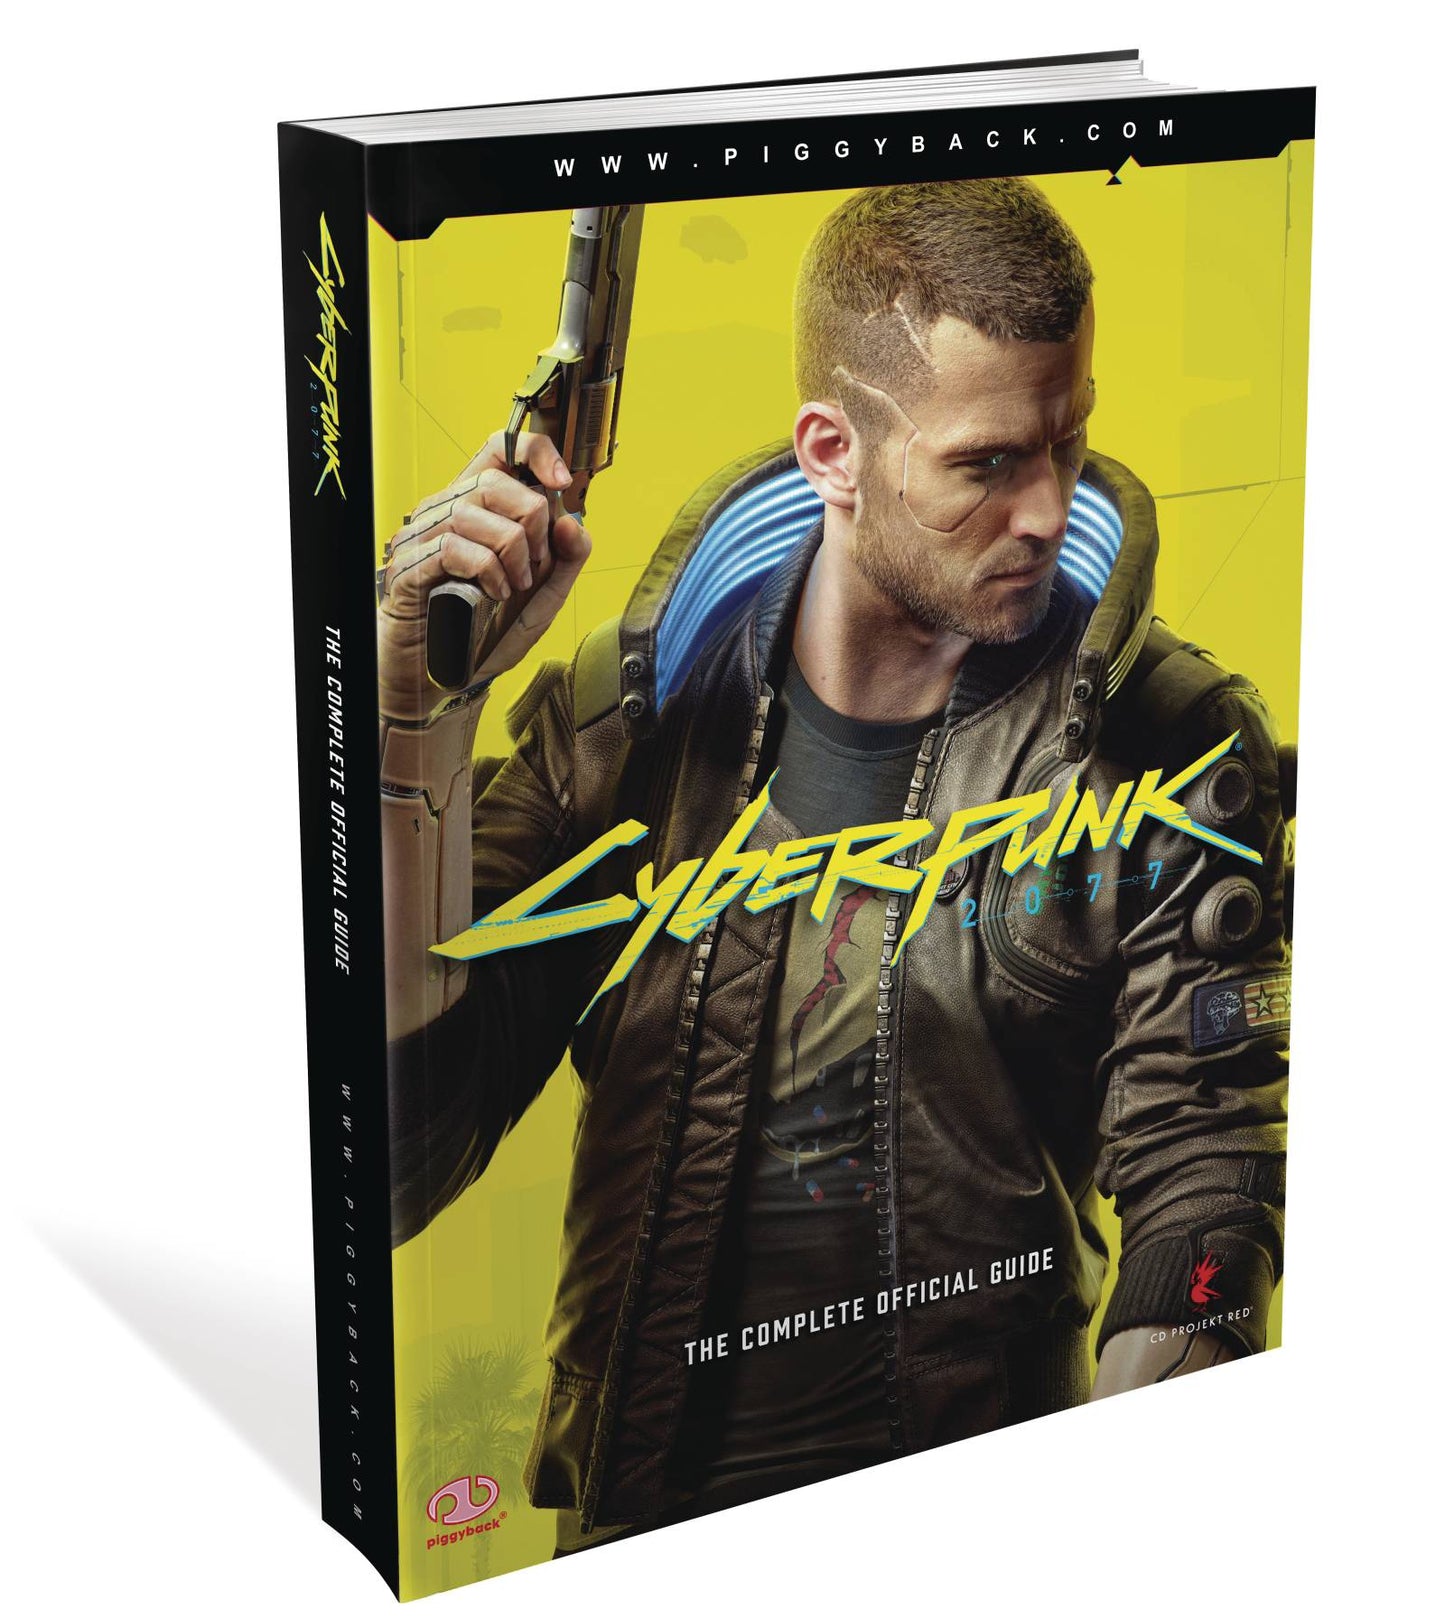 CYBERPUNK 2077 COMPLETE OFFICIAL GUIDE SC